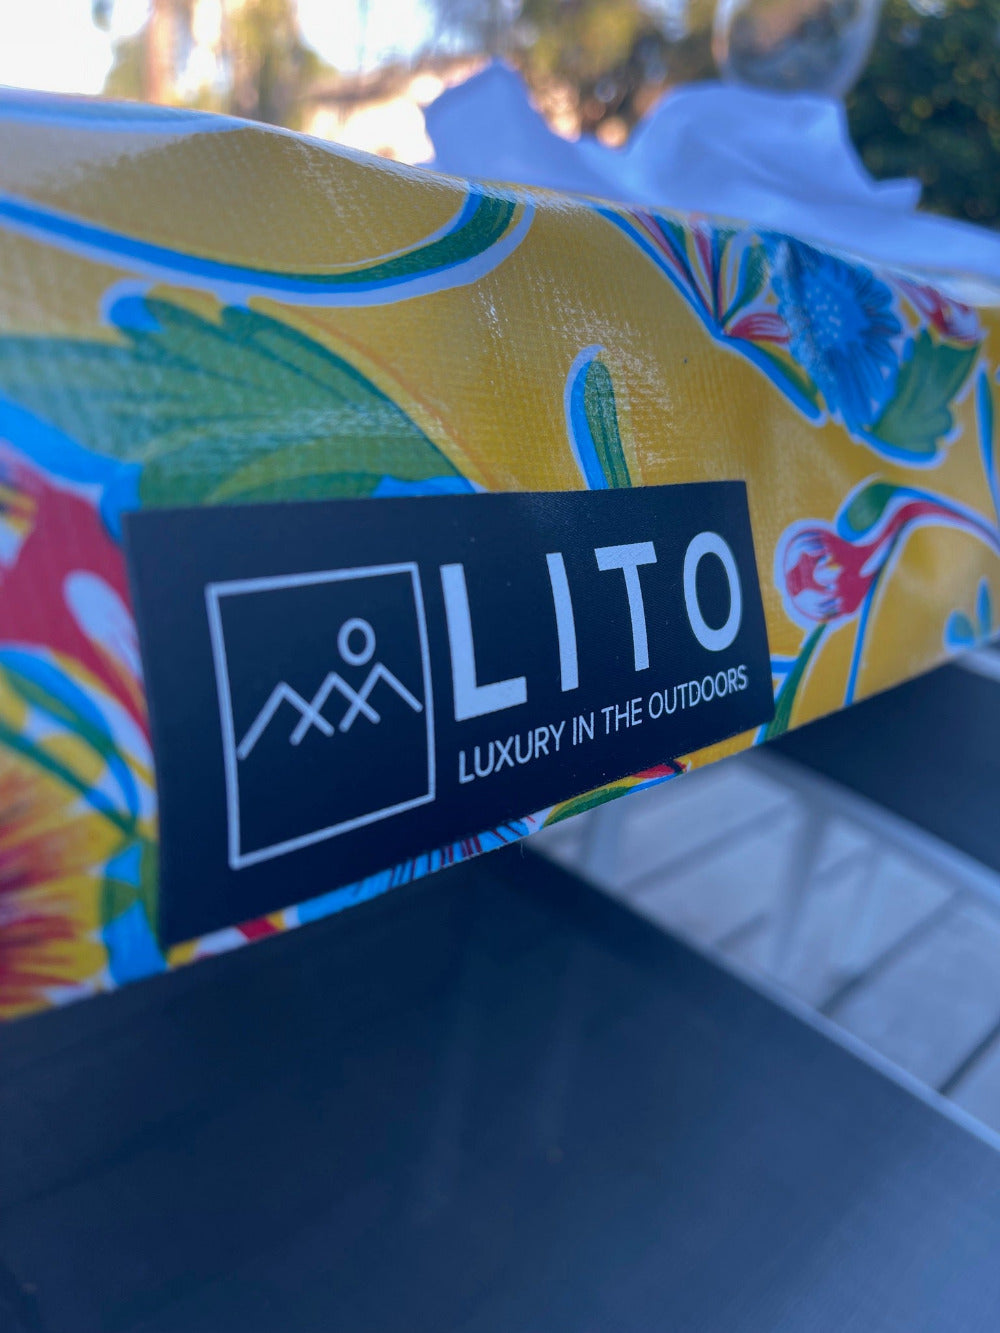 LITO logo and tagline on yellow flower outdoor tablecloth